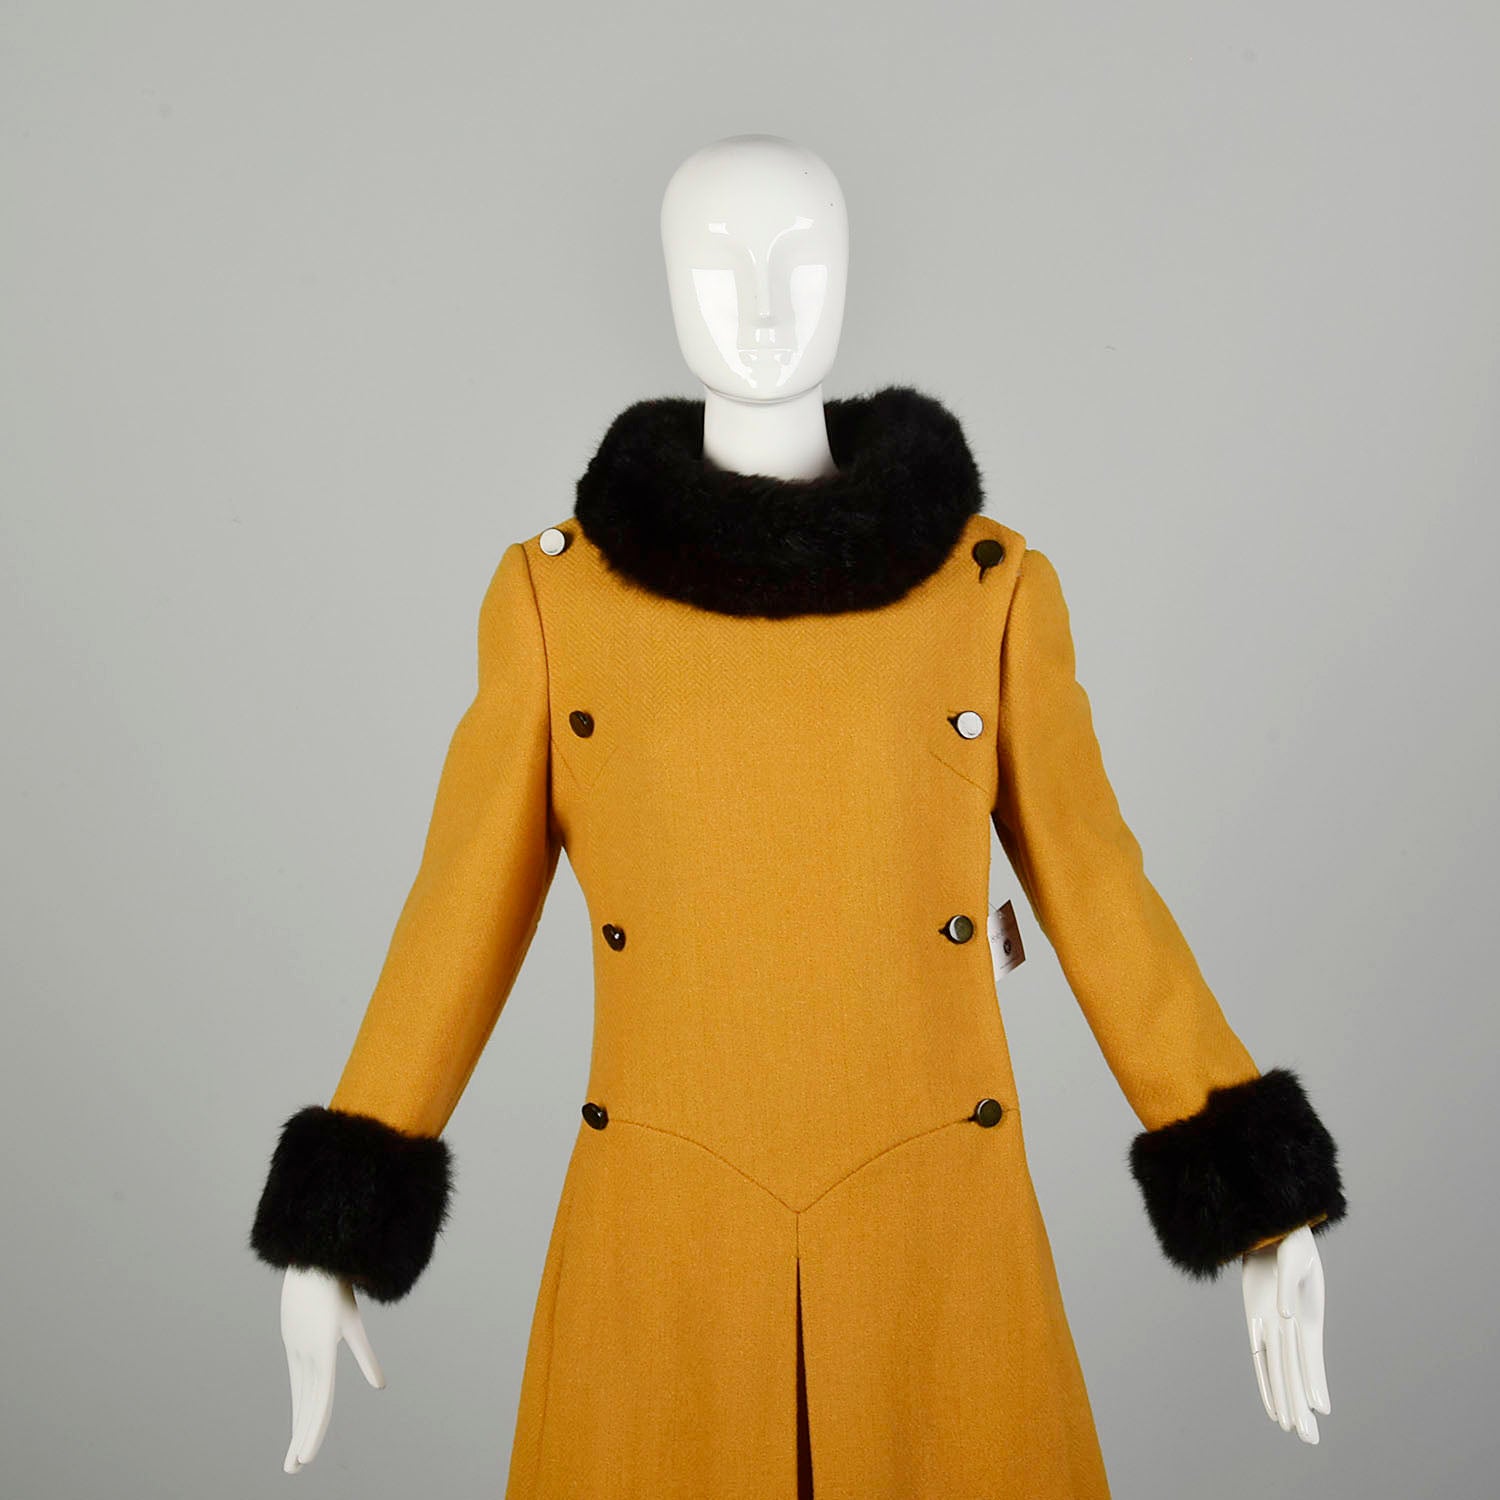 Small 1960s Coat Mustard Mod Military Double Breasted Real Fur Winter